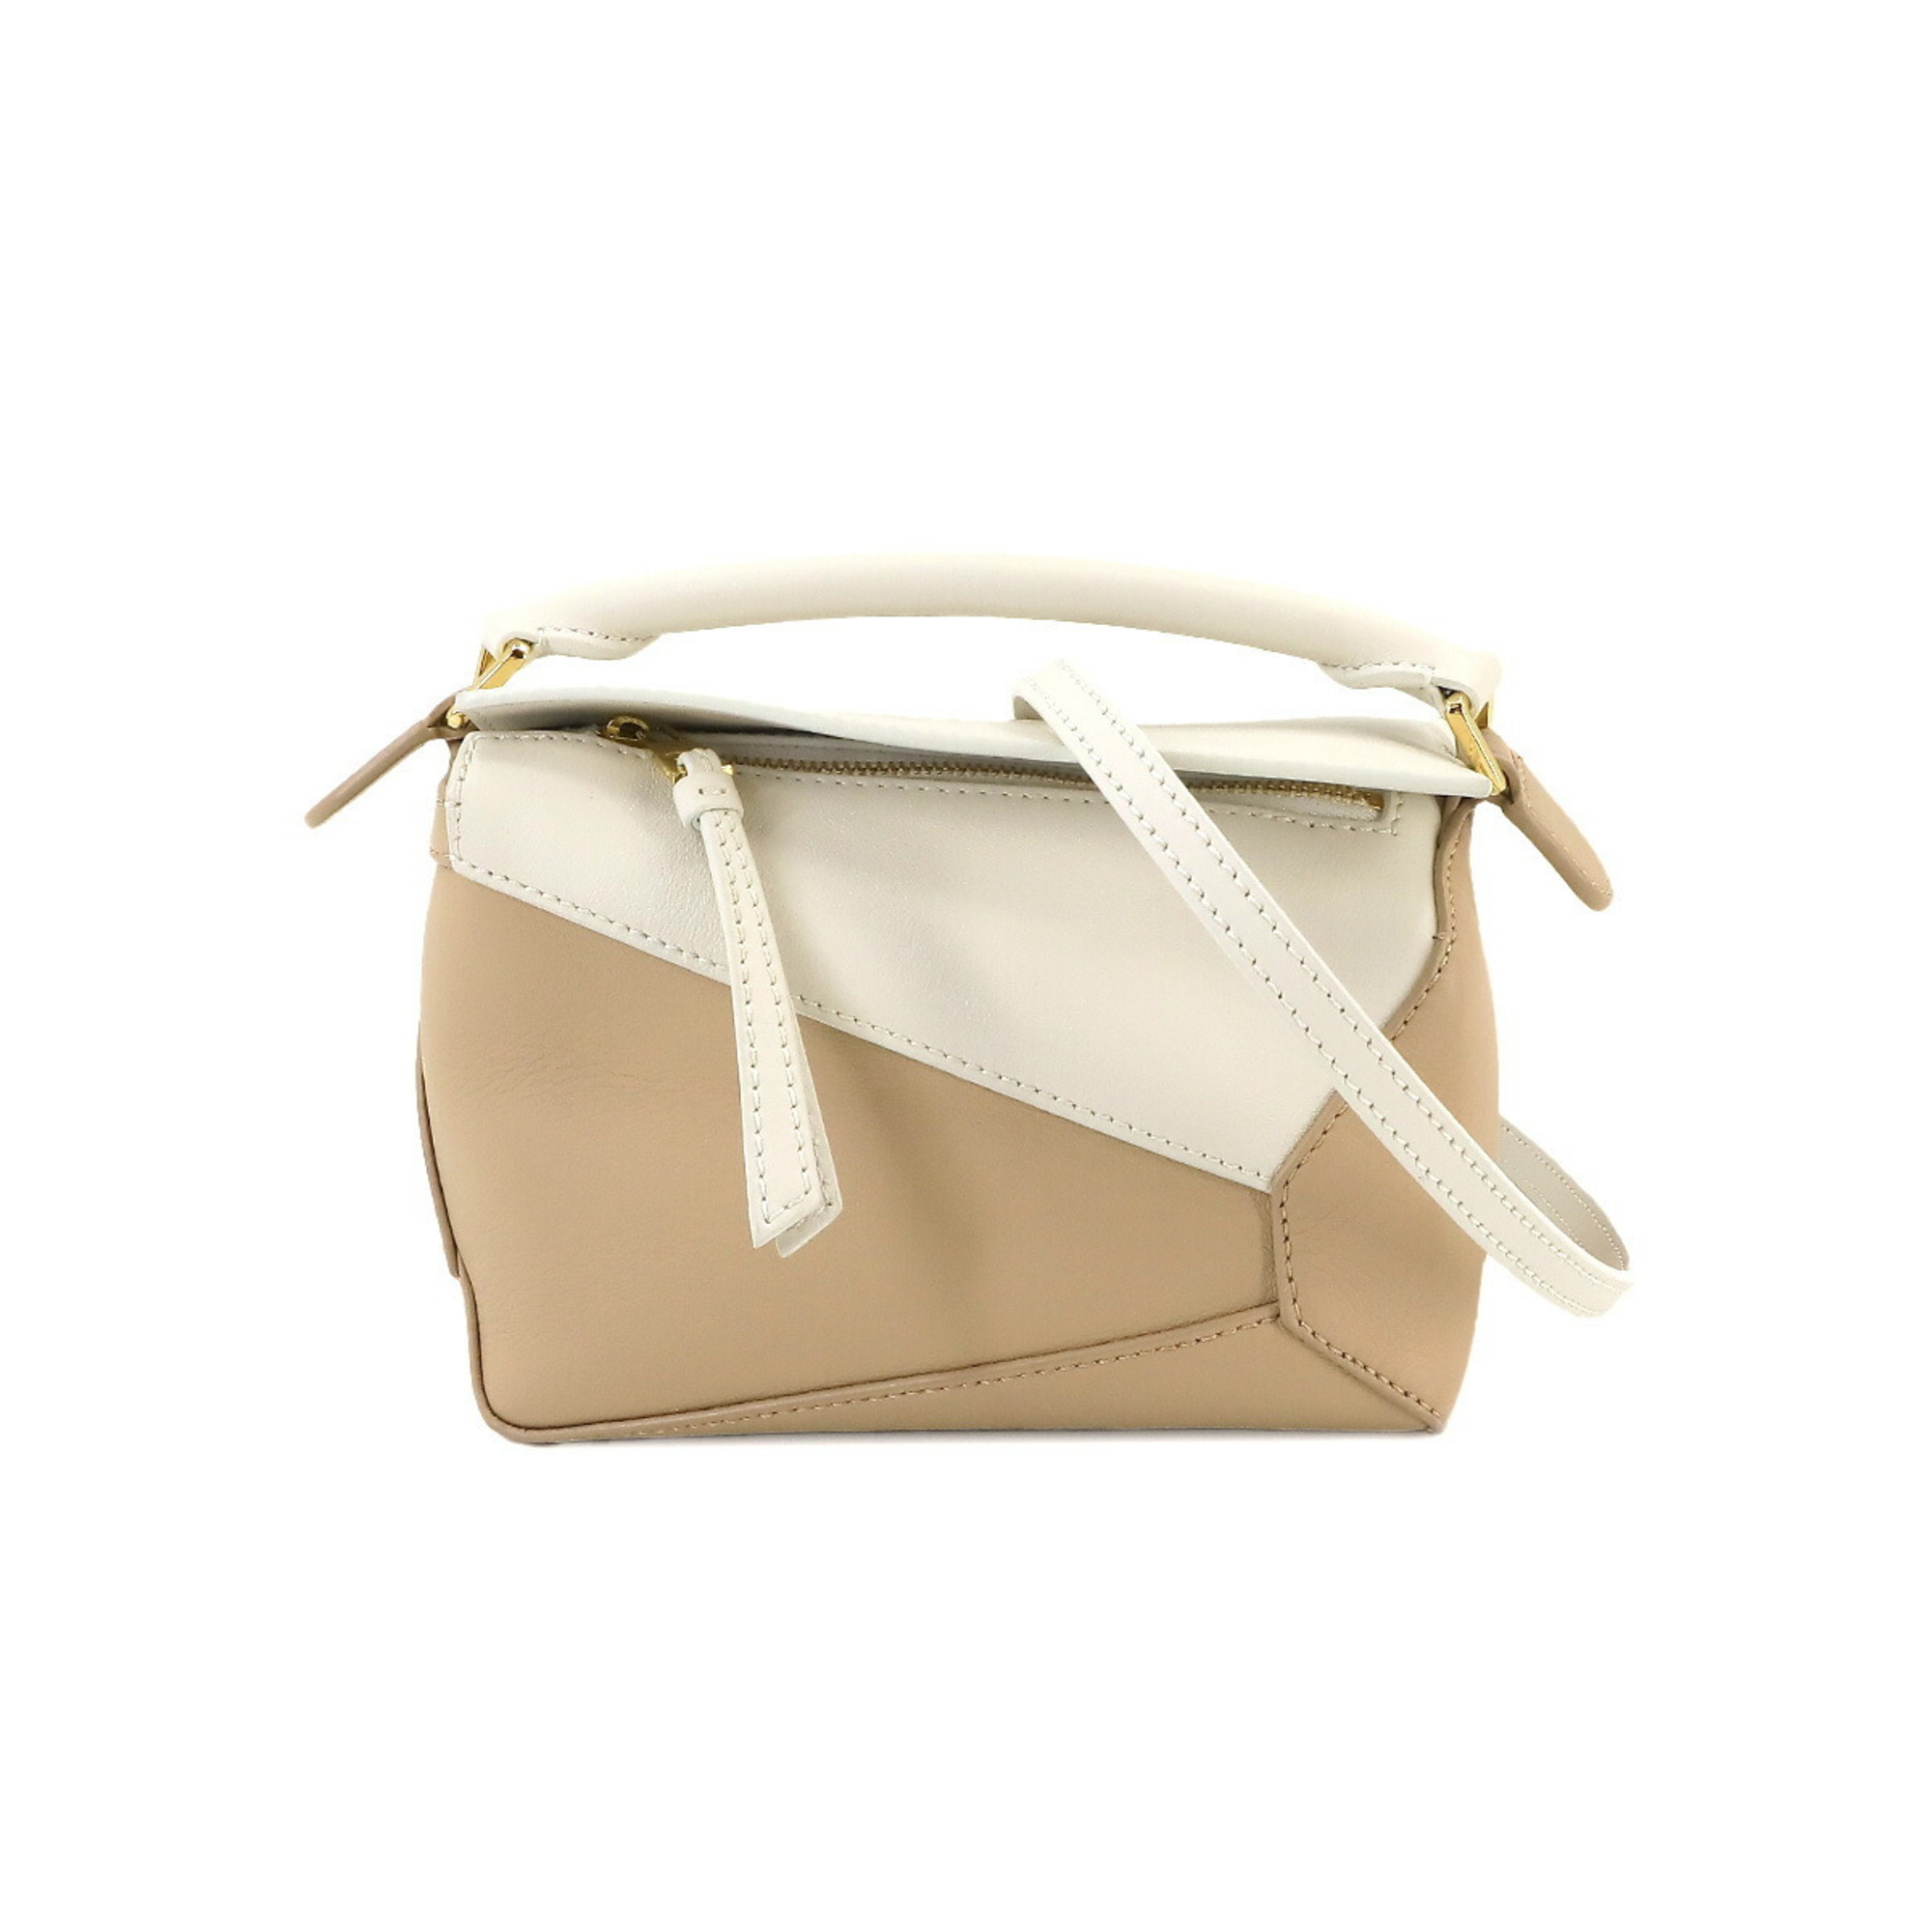 LOEWE Puzzle Bag 2way Hand Shoulder Leather Beige White A510P88X30 Gold Hardware Mini